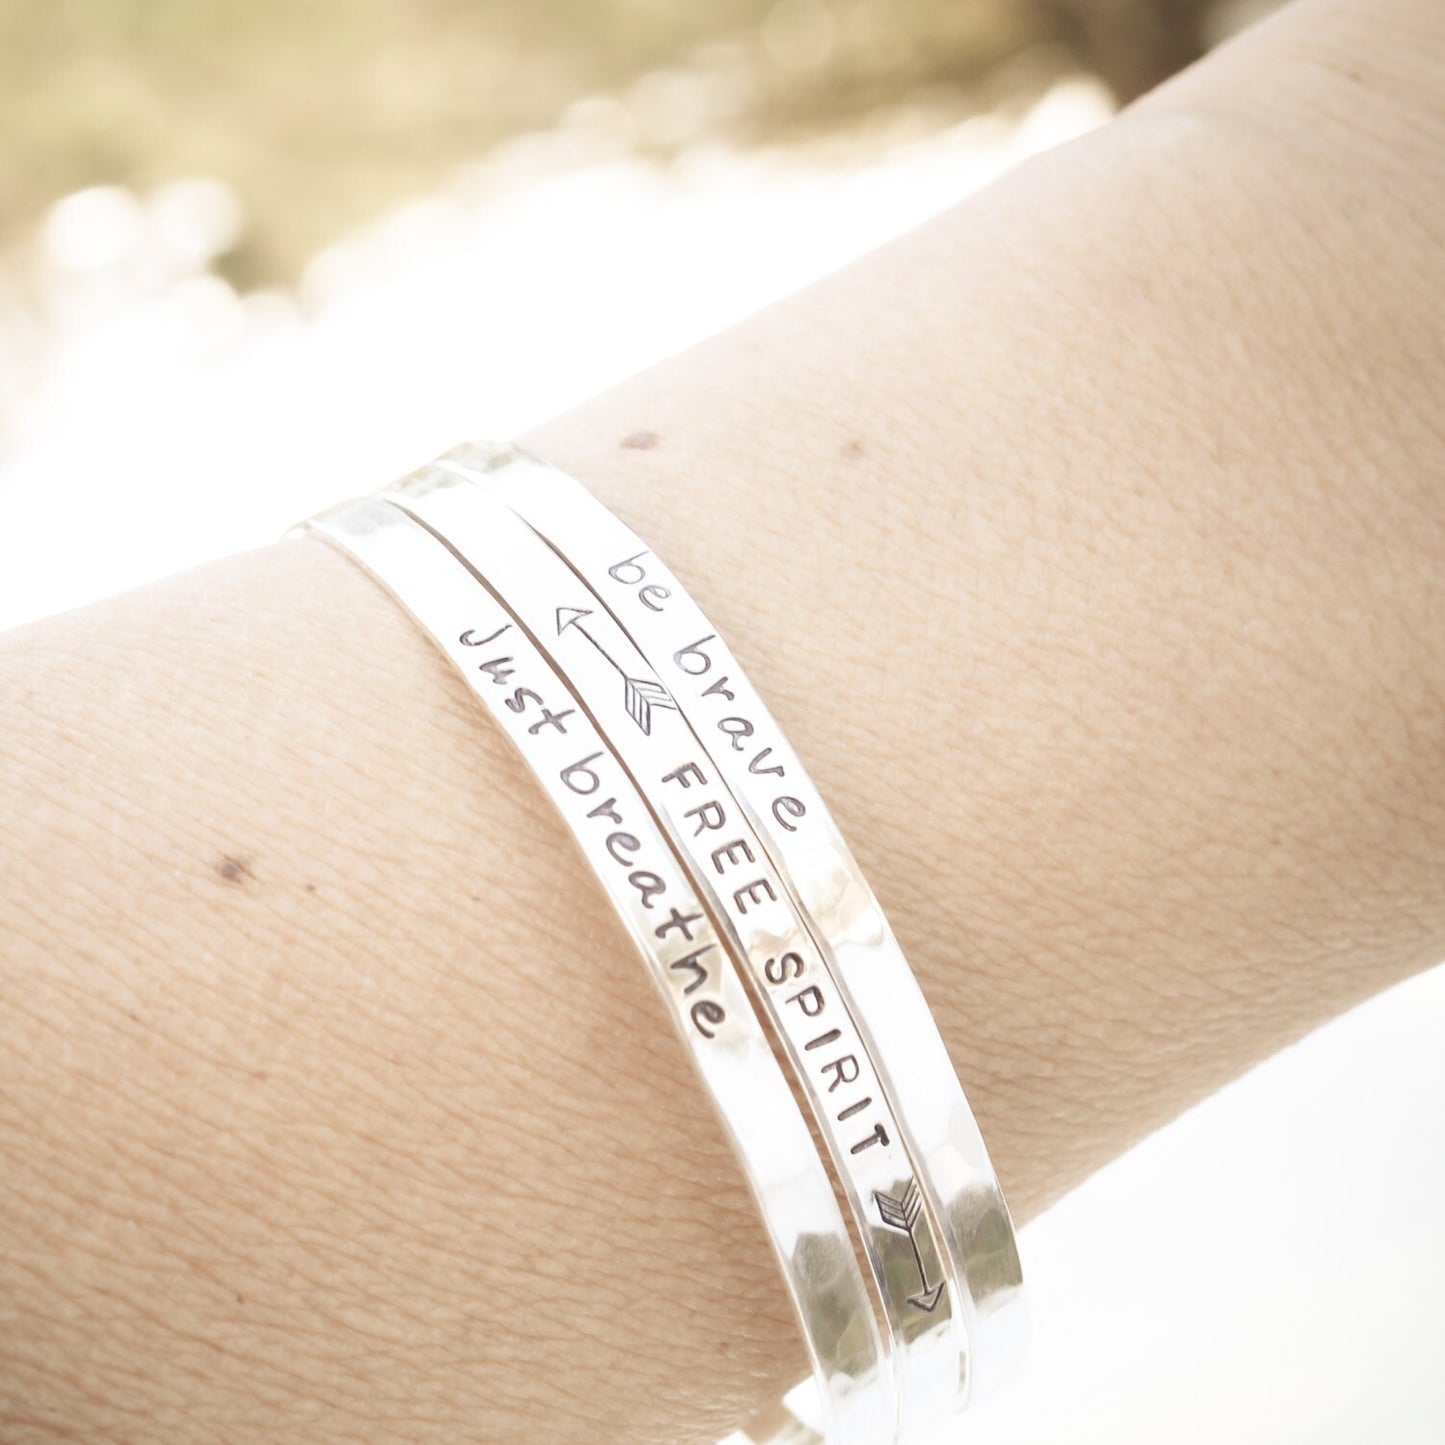 1 (One) THIN Sterling Silver CUFF Hand Stamped and Personalized with Your Name or Quote Customized Stacking Bracelet